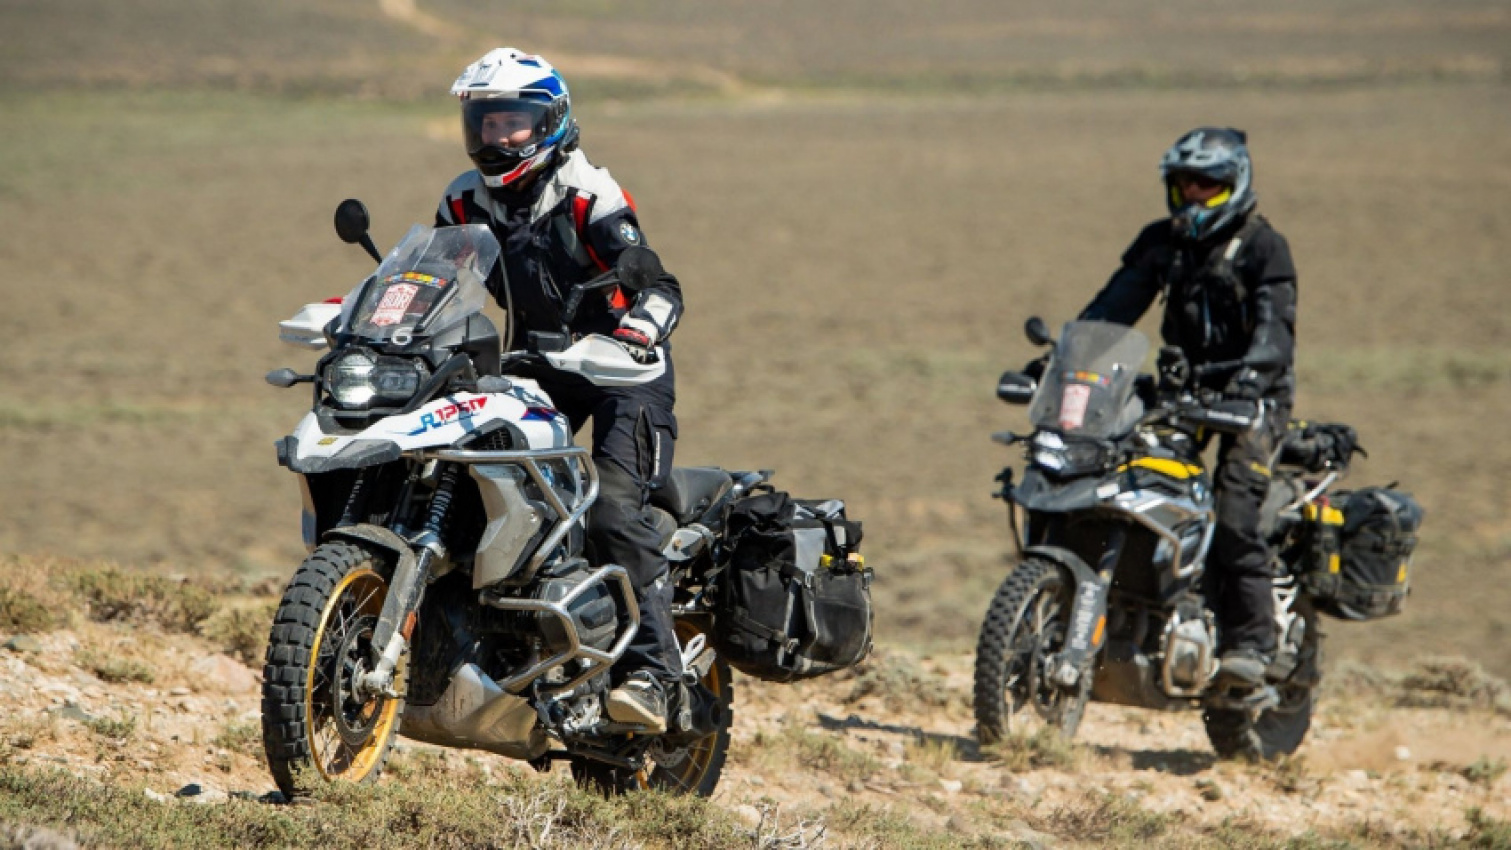 autos, bmw, cars, american, asian, celebrity, classic, client, europe, exotic, features, handpicked, luxury, modern classic, motorcycle, muscle, news, newsletter, off road, sports, trucks, motorcycle monday: bmw motorrad wants to send you on a wyoming adventure